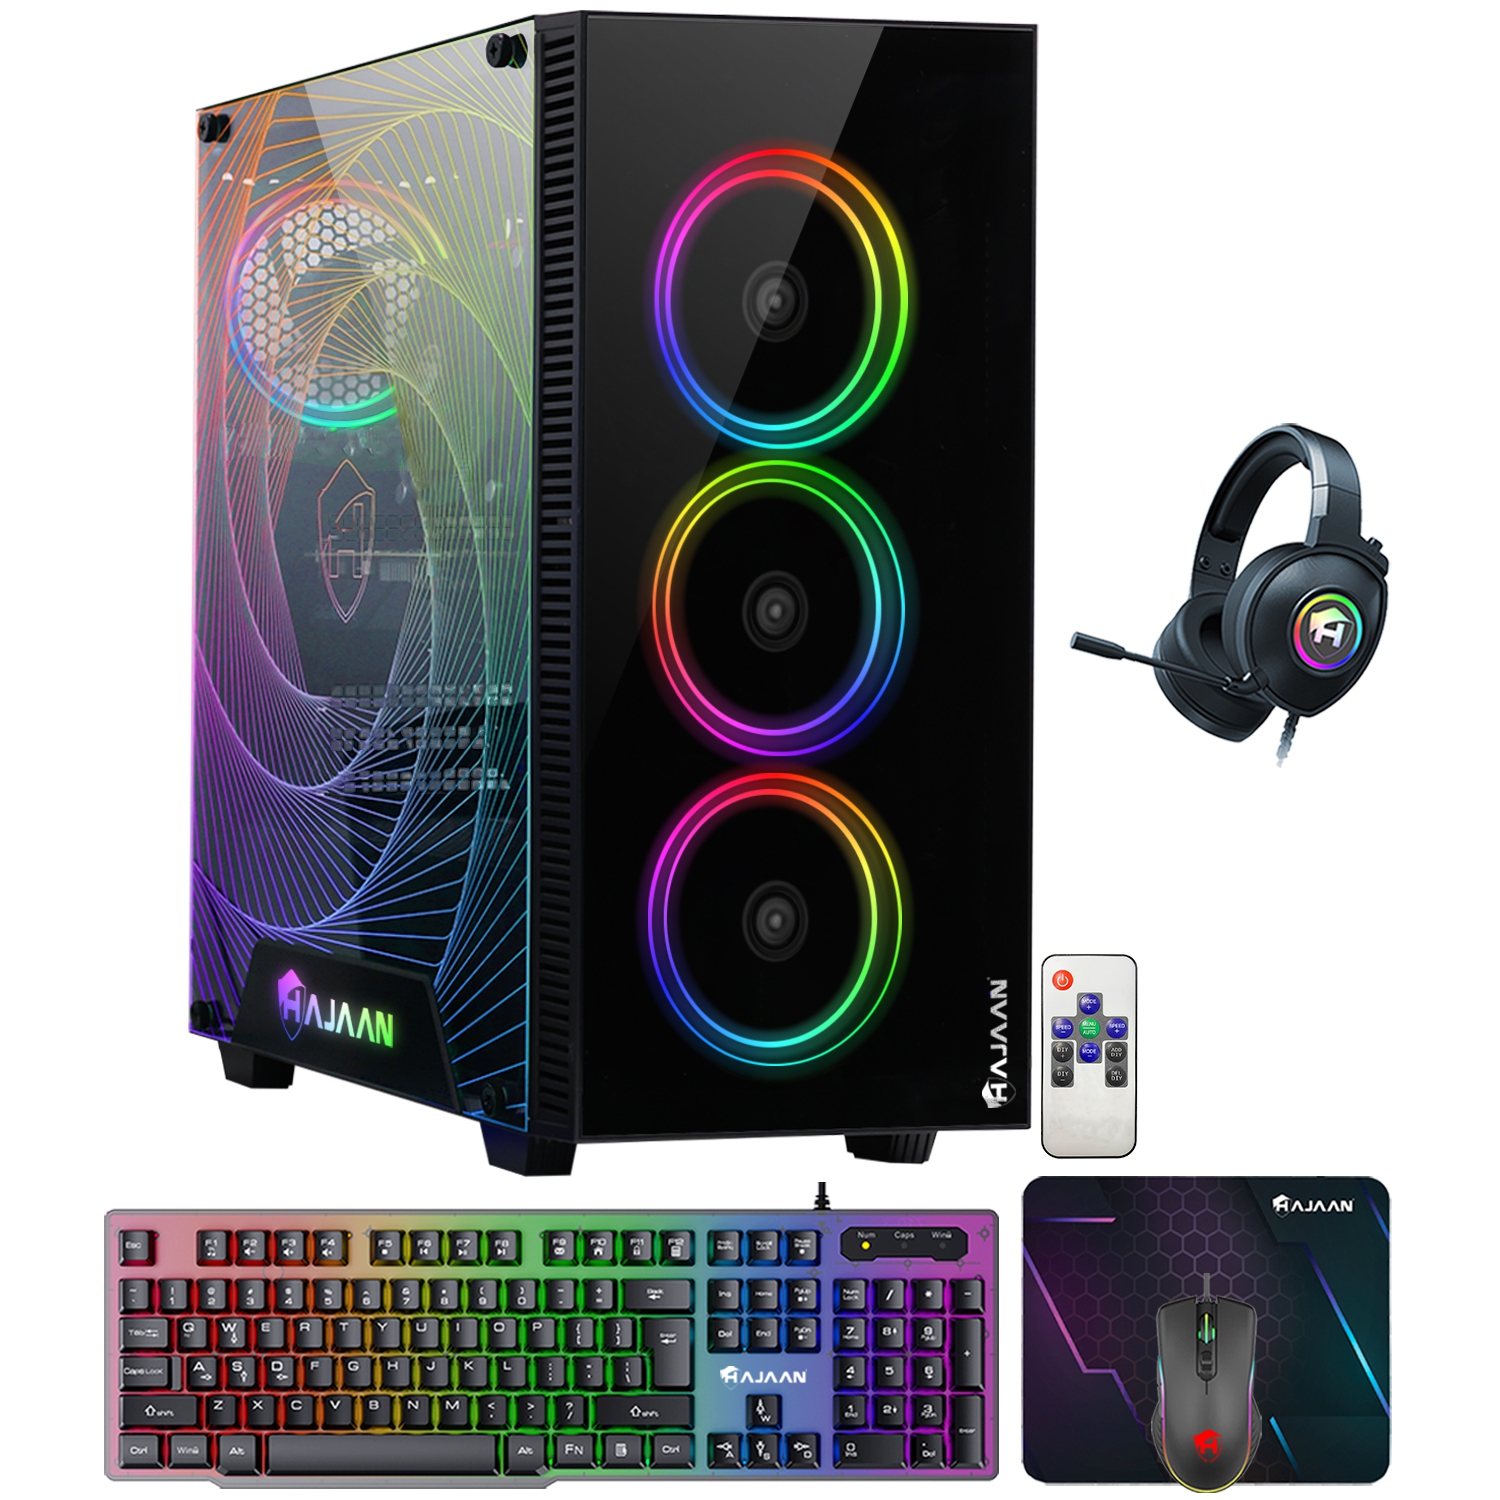 HAJAAN CYCLONIA Gaming Tower Computer Desktop PC - AMD Ryzen 5 5600G Processor Up to 4.4GHz - RTX 3070 8GB GDDR6 - 16GB DDR4 - 1TB SSD - Windows 11 Pro - Keyboard Mouse and Headset